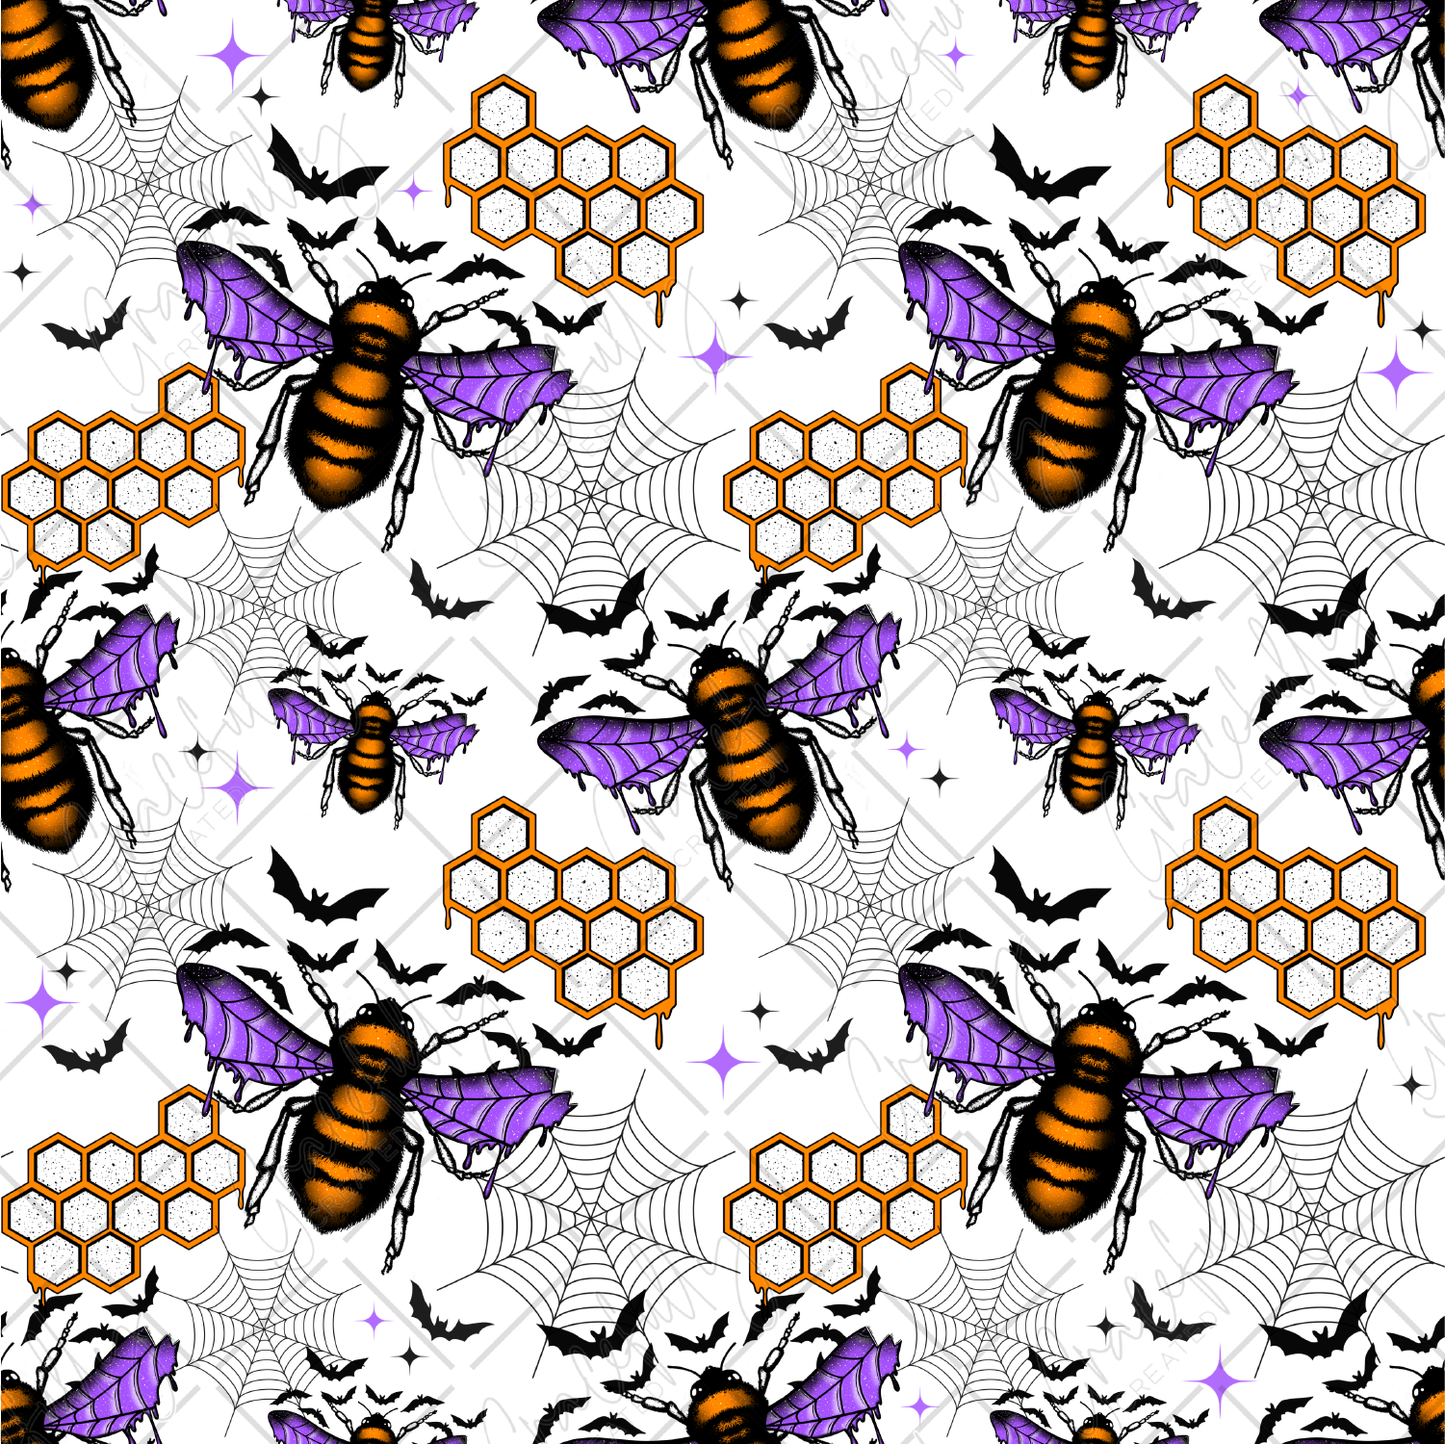 HPV30 Spooky Bees